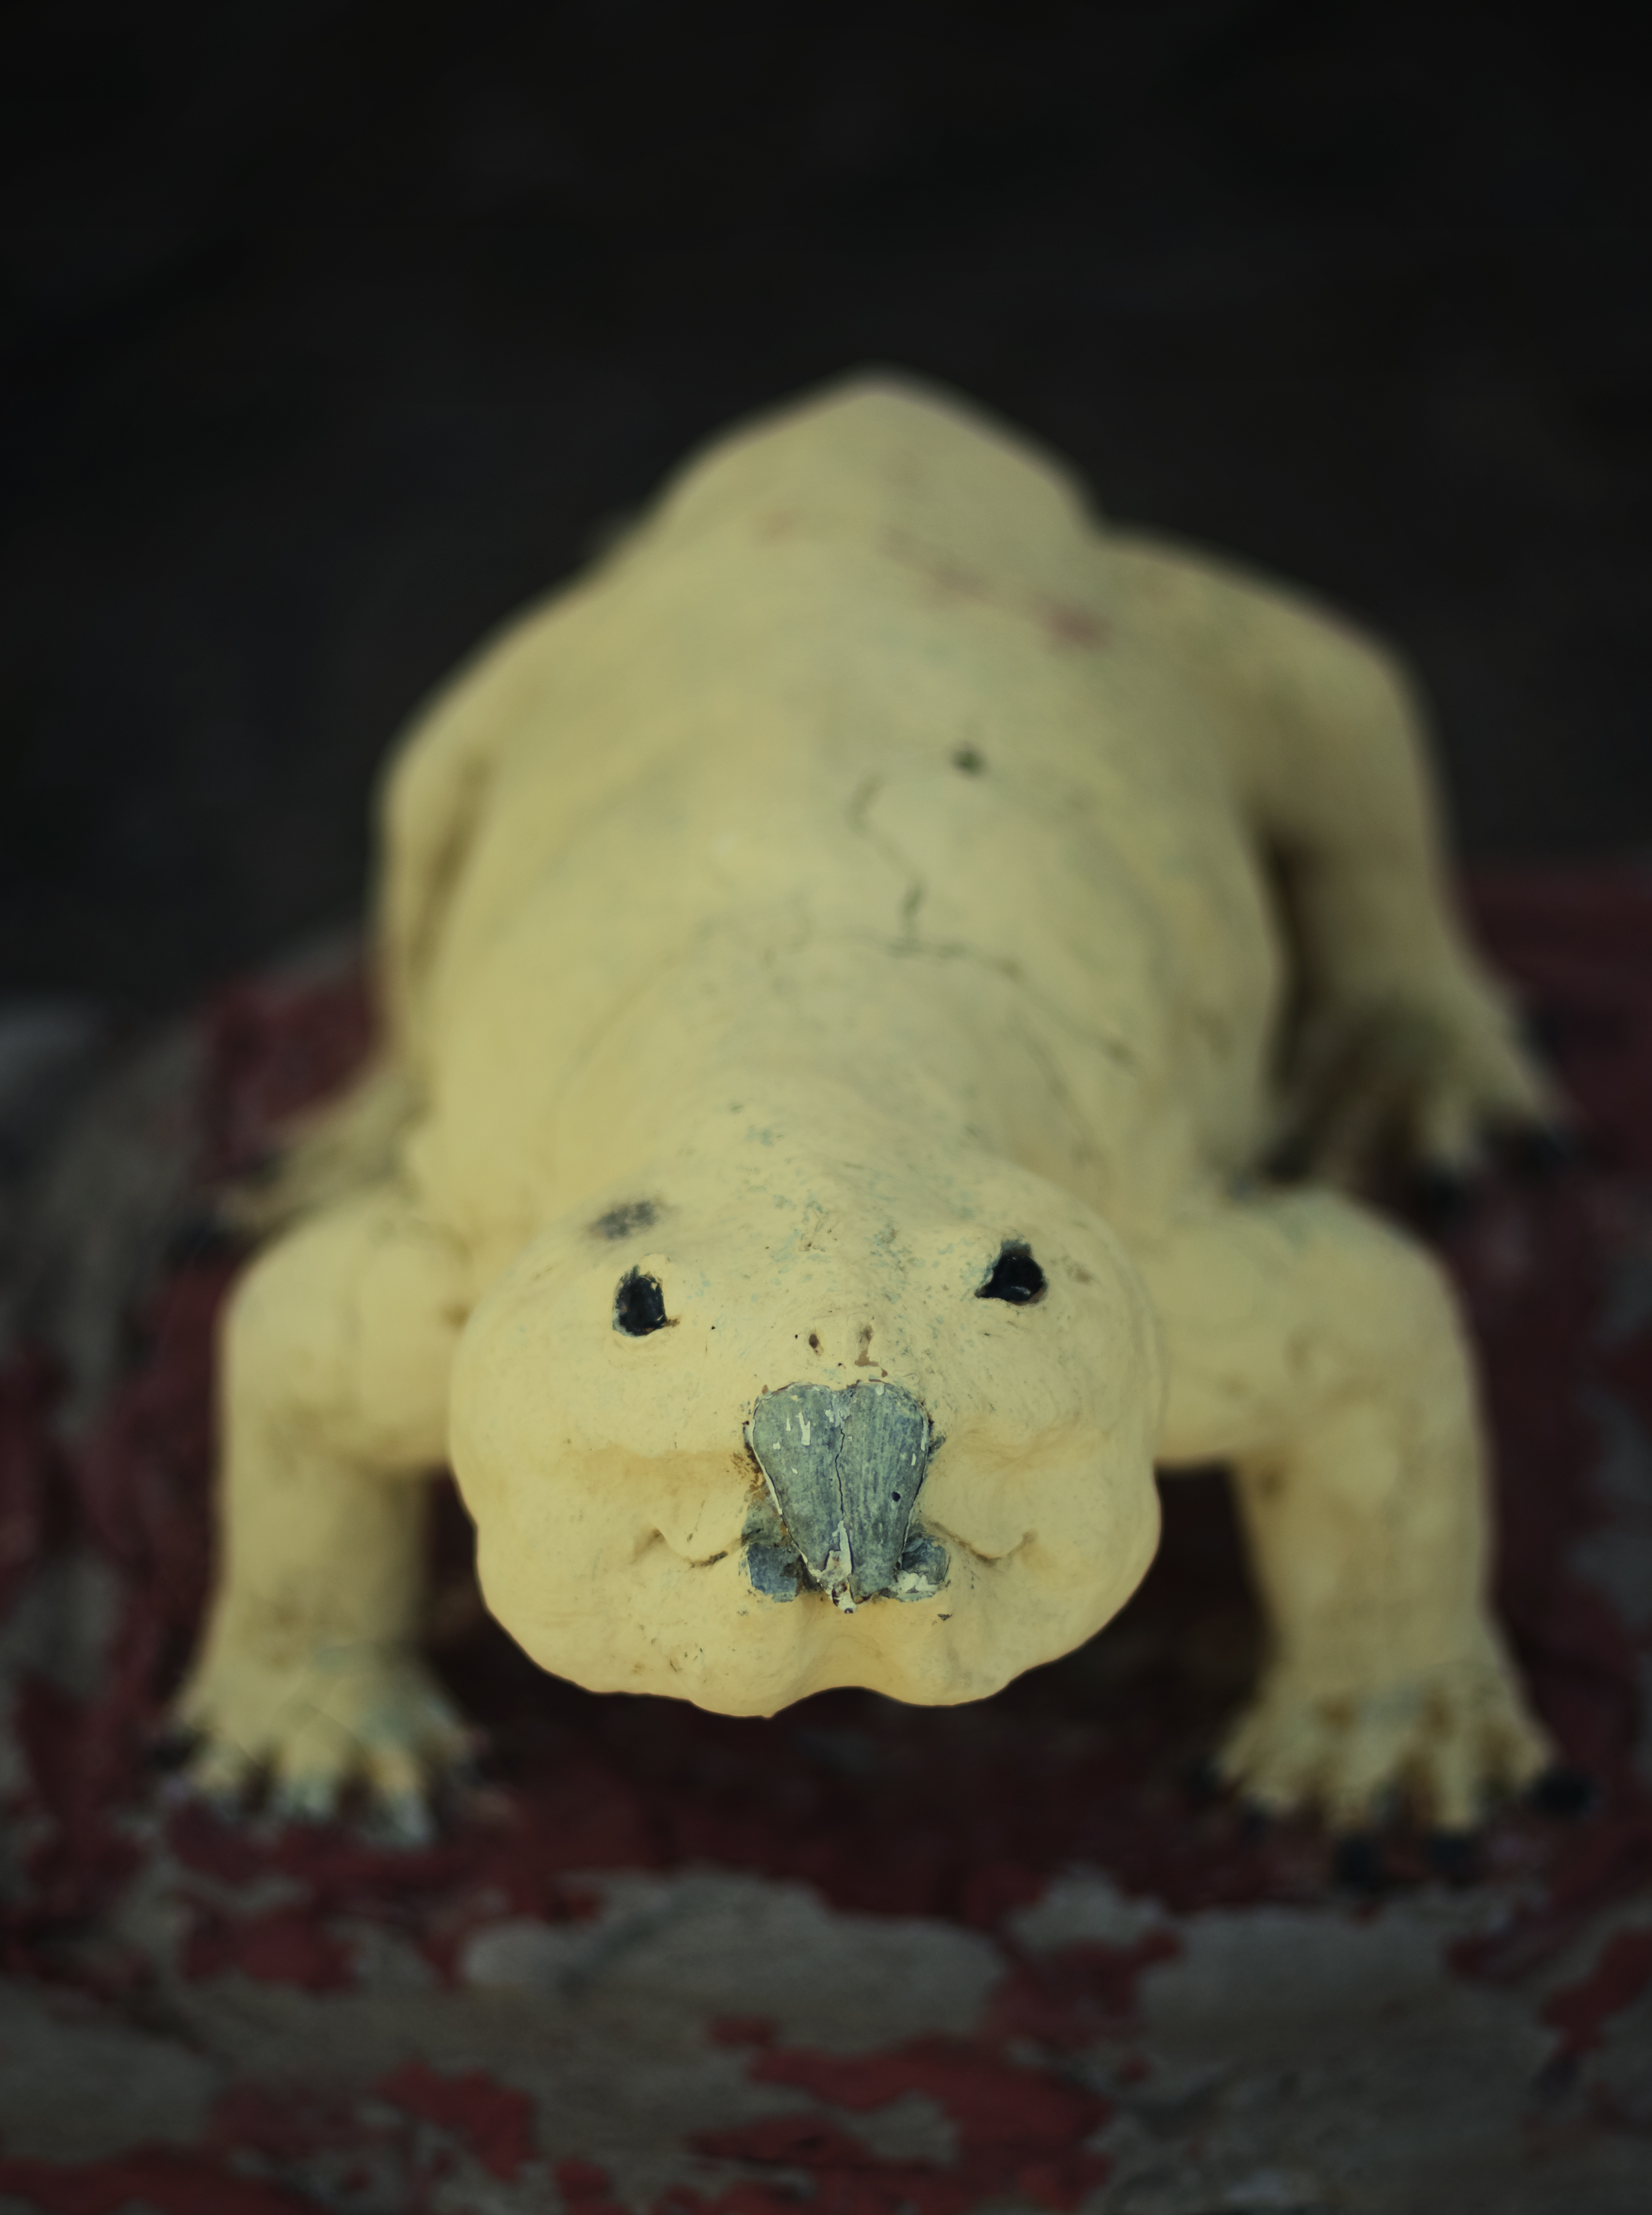 A yellow, lizard-like sculpture with a small grey beak. The up close framing of the sculpture and the shallow depth of field gives it the appearance of a real (yet fantastic) animal.